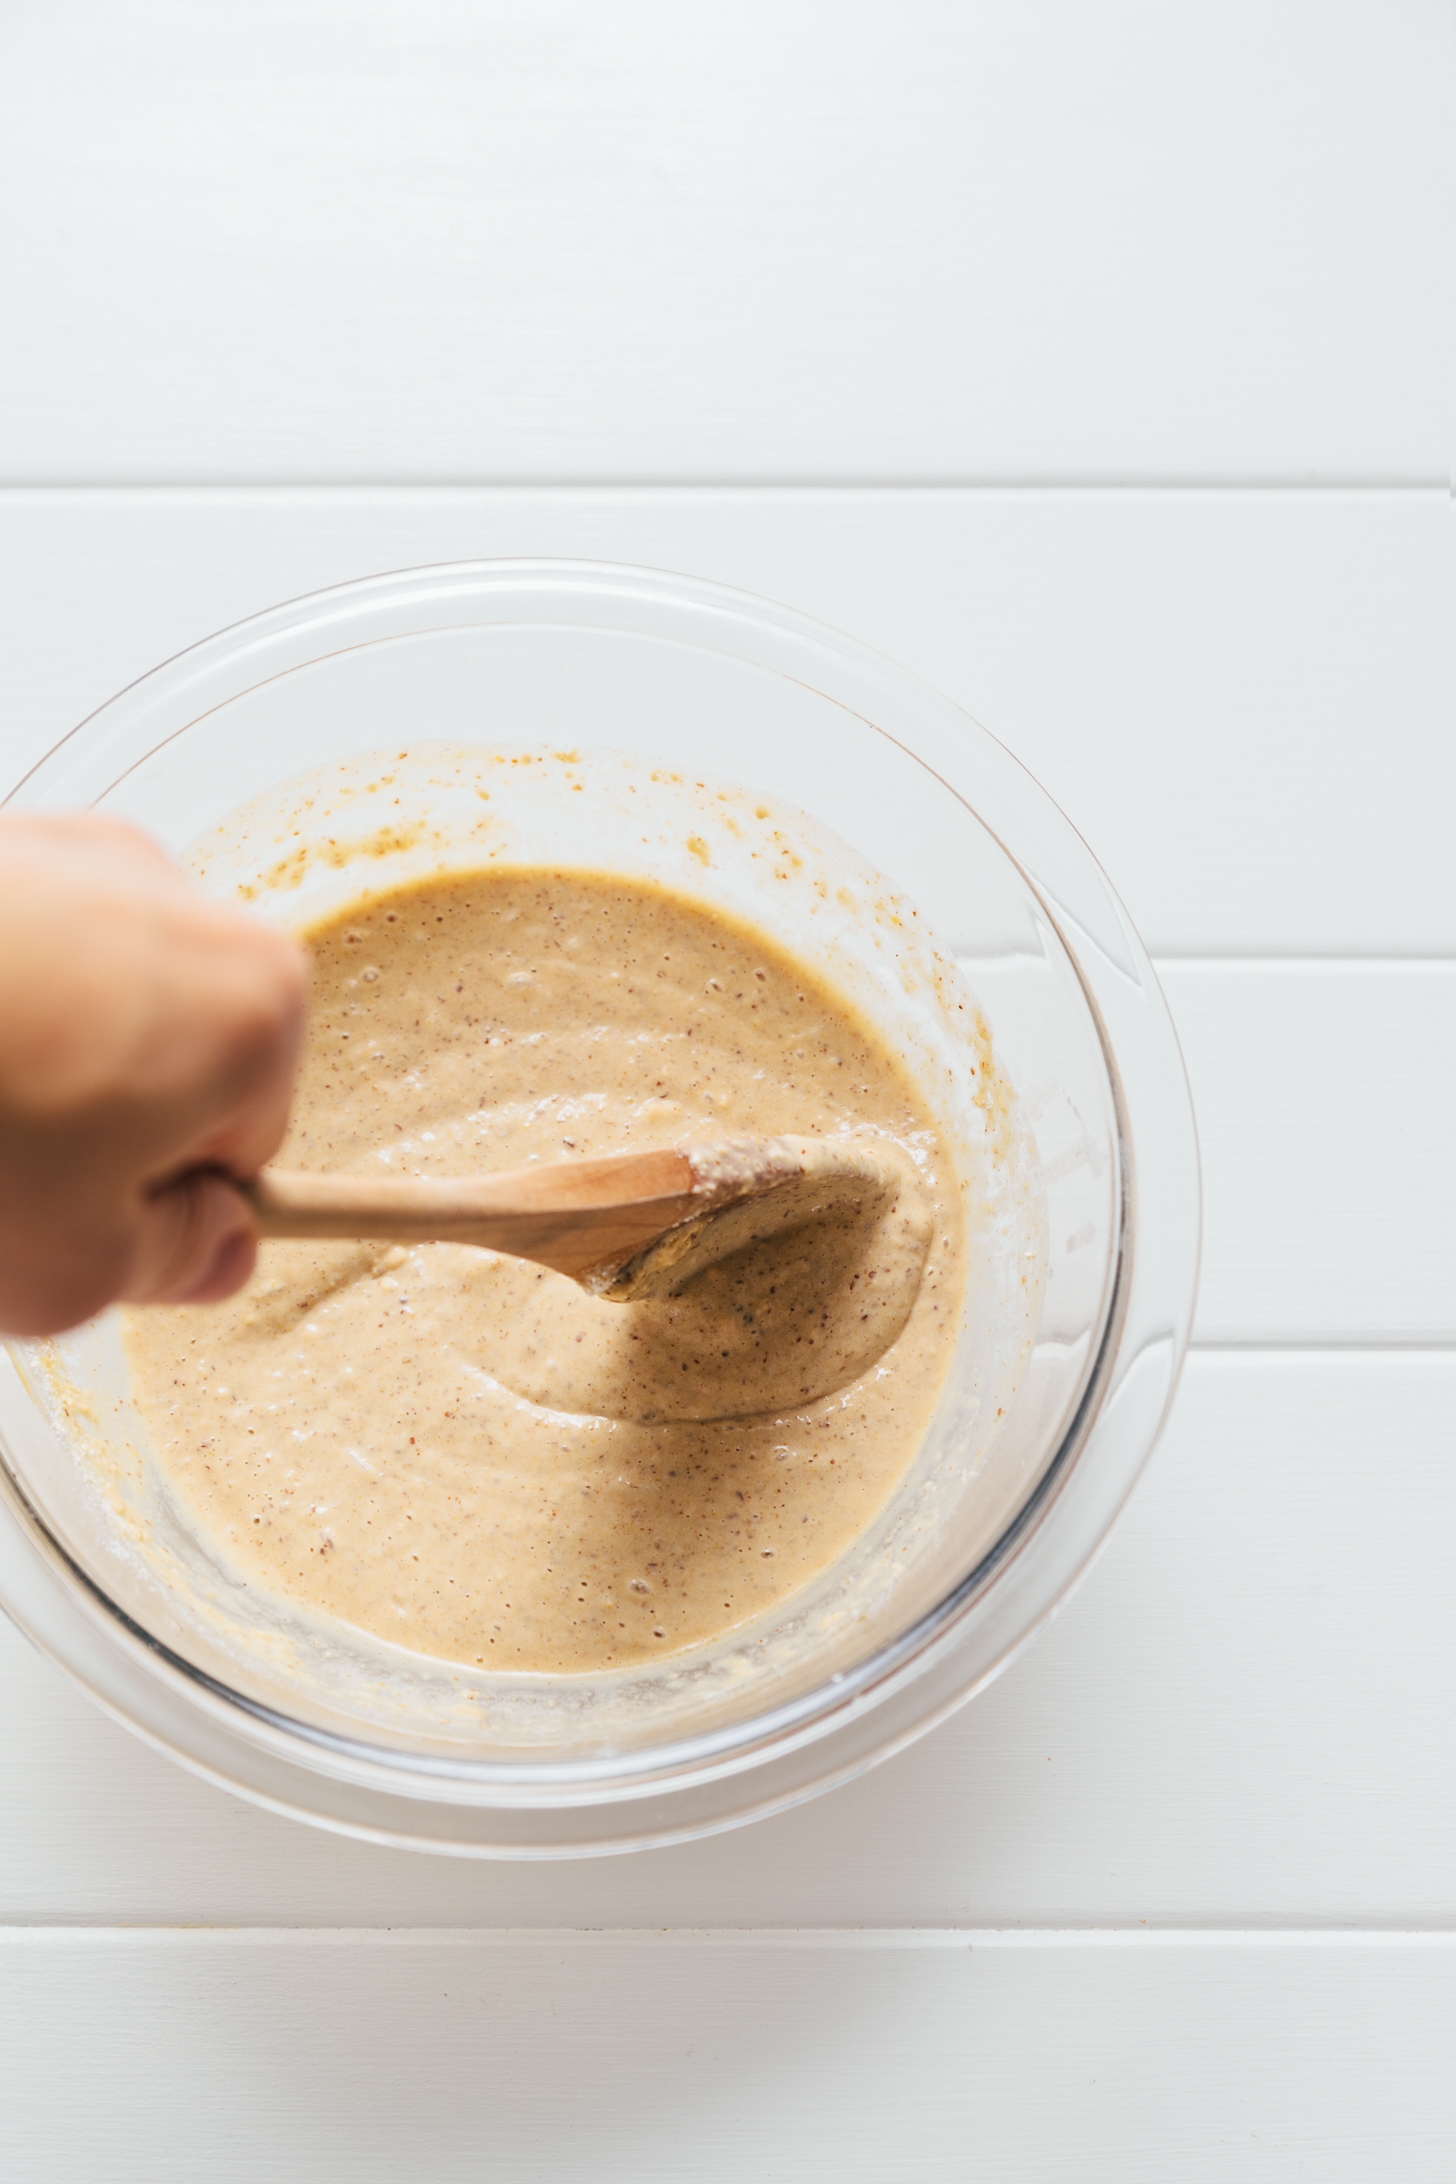 Using a wooden spoon to stir Peanut Butter Protein Pancake batter